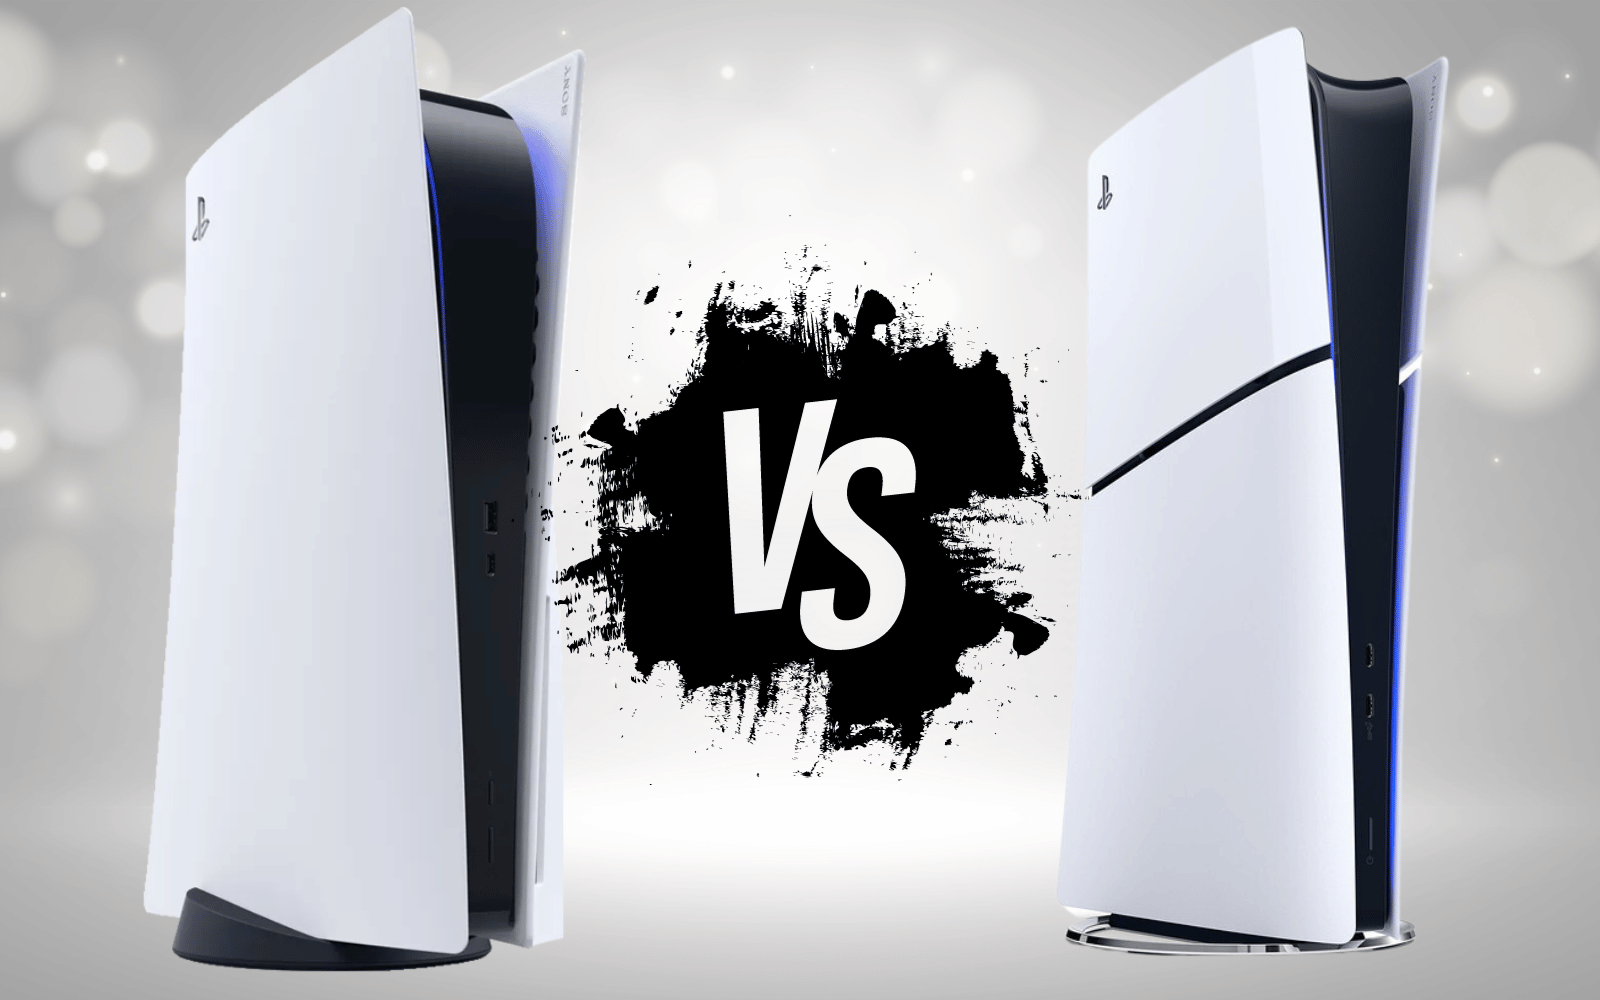 Comparison of PS5 Slim and PS5 Pro, which one do you want to buy?